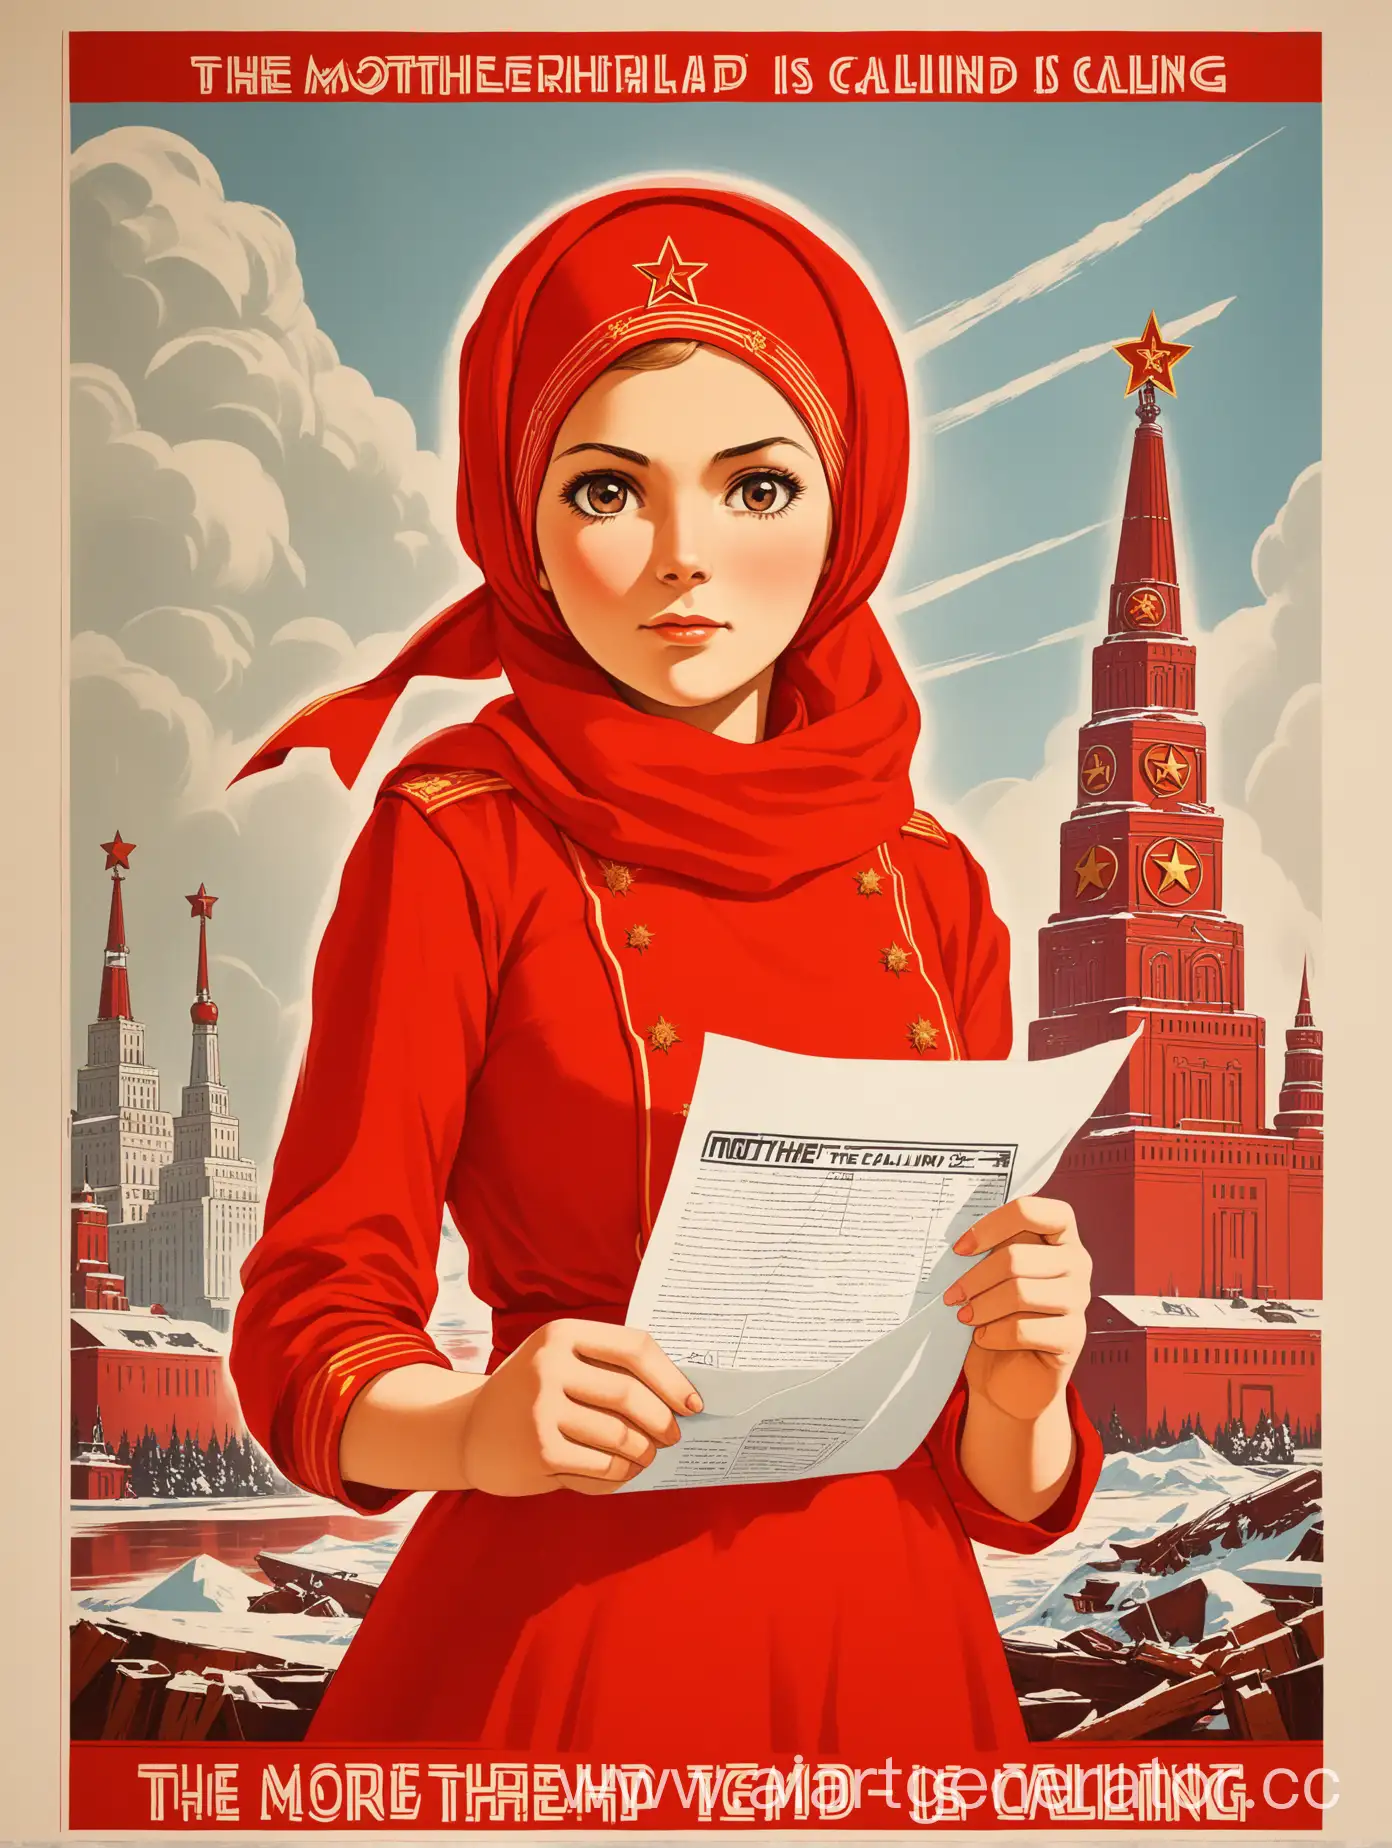 the ussr poster, 1girl, the motherland is calling, red dress, headscarf, red headscarf, looking at the viewer, with a piece of paper, ussr style
